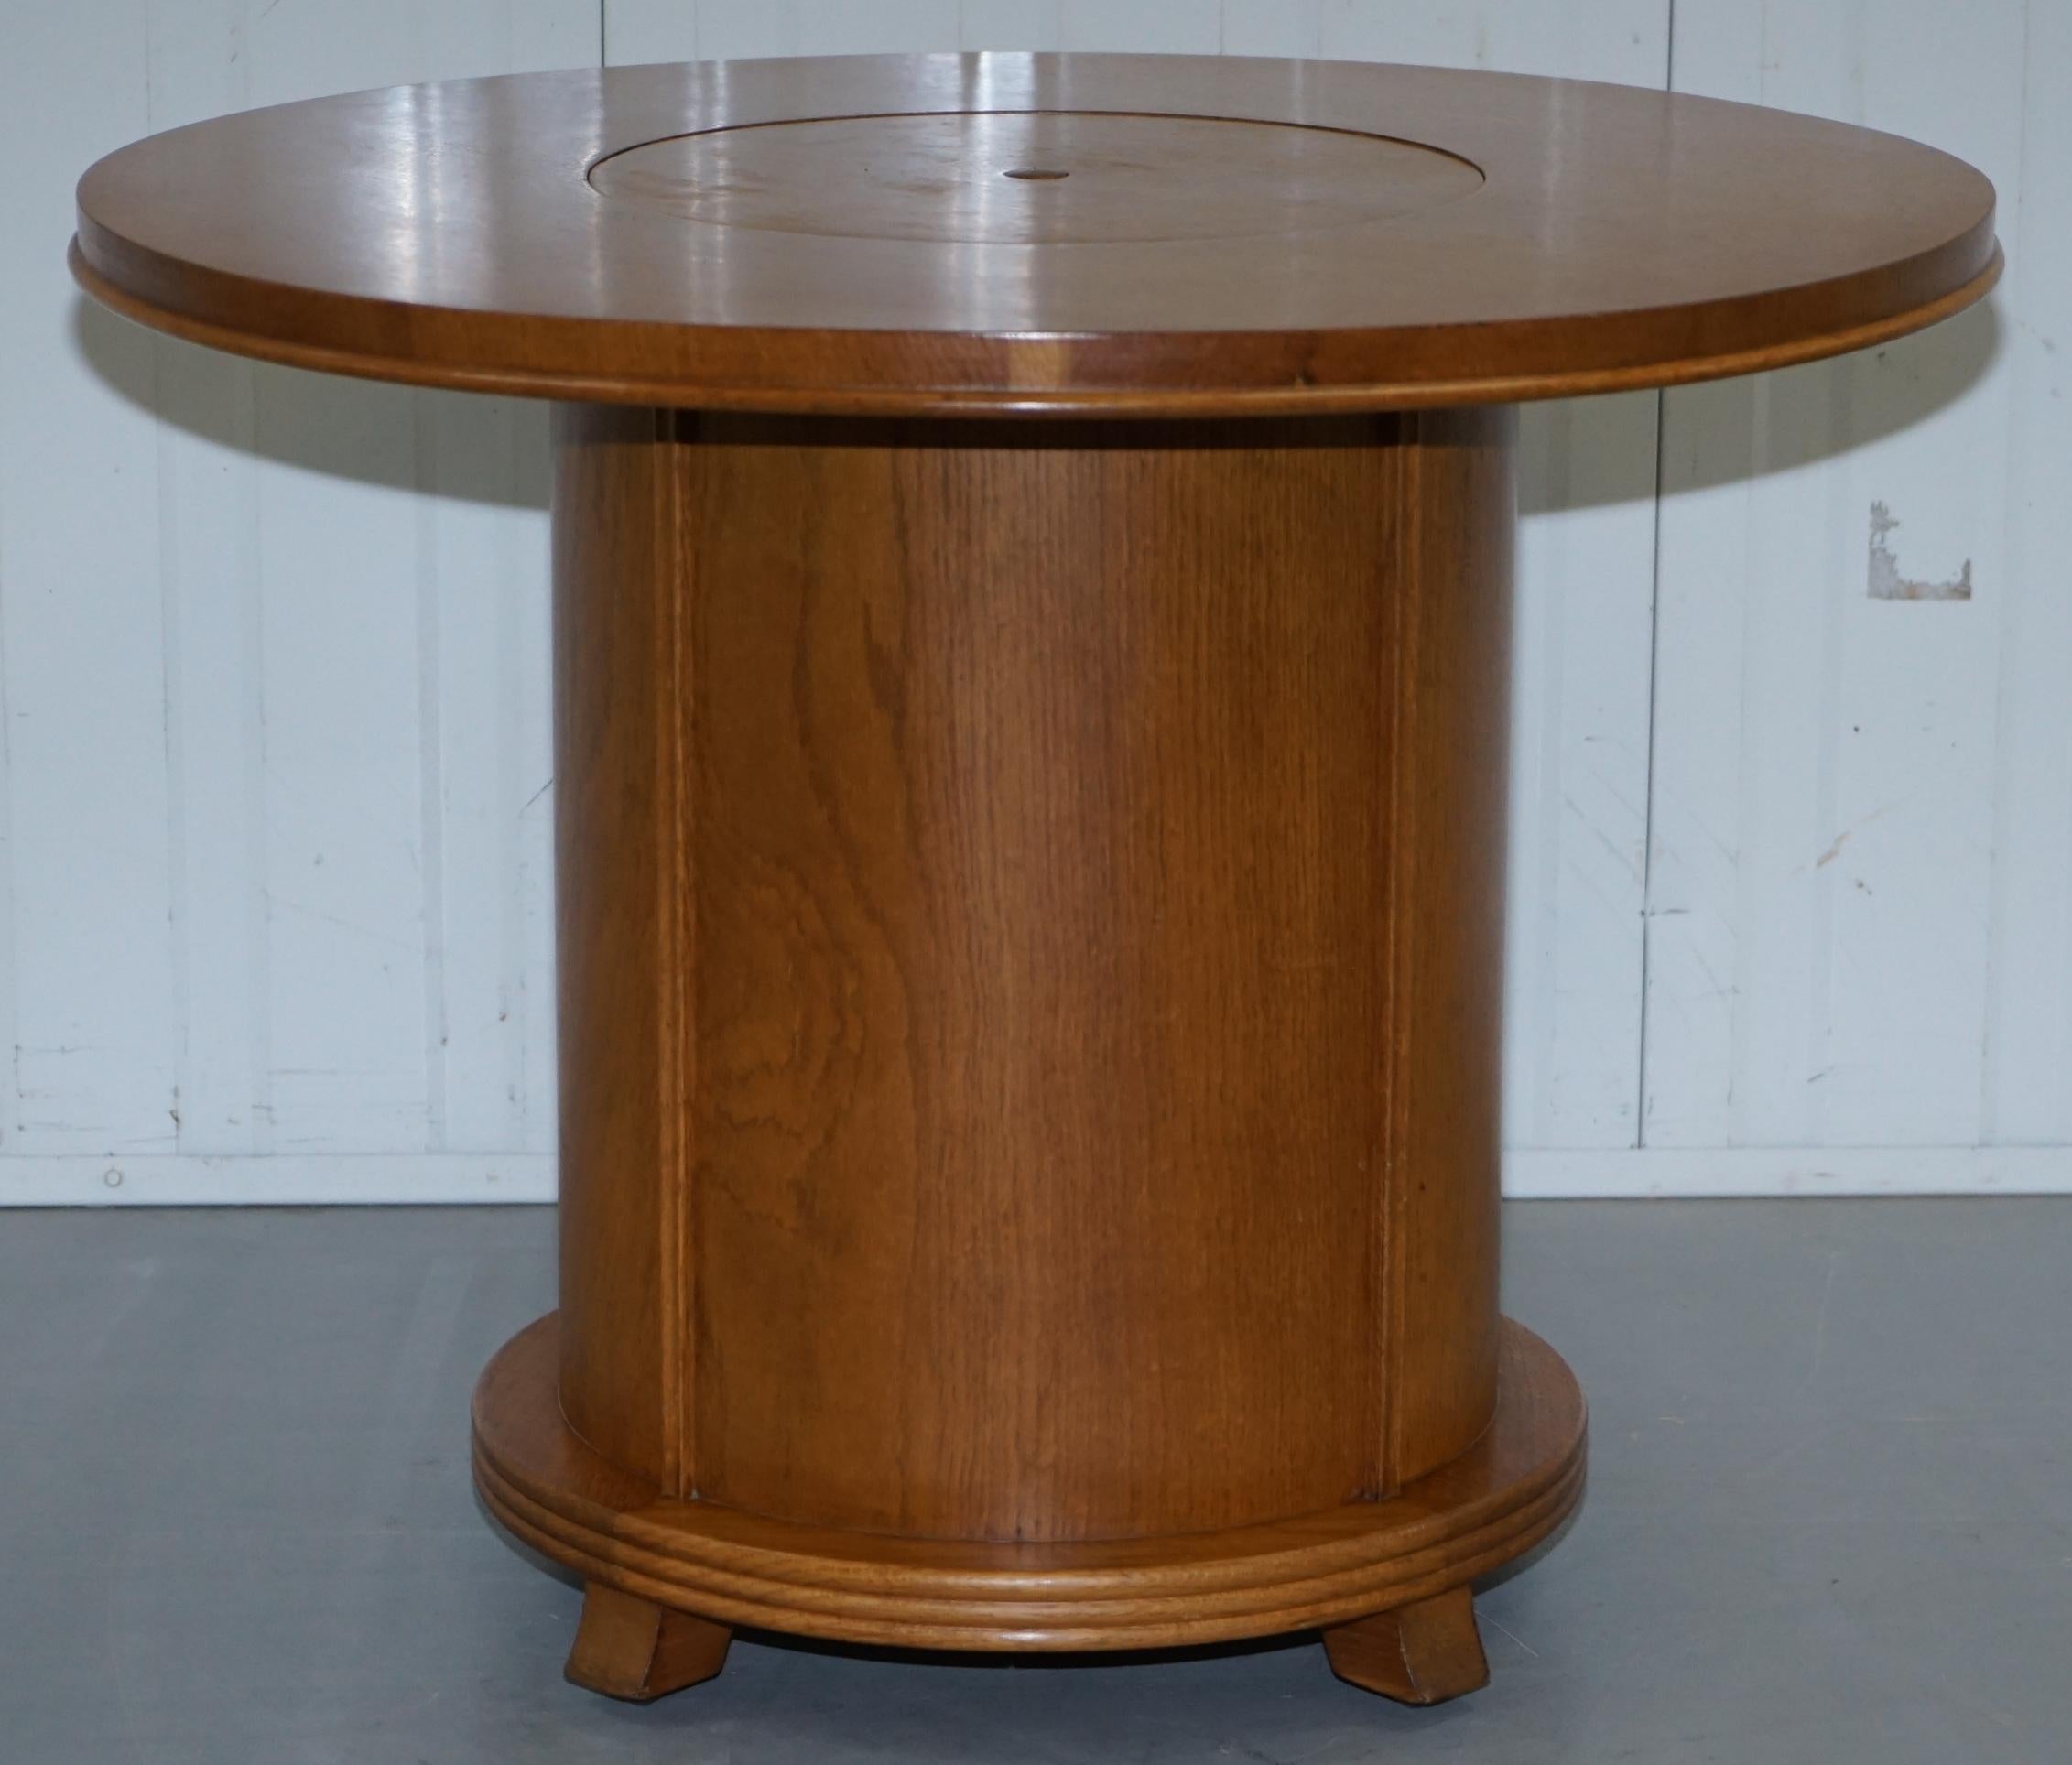 Mid-20th Century Rare 1930s Walnut Cocktail Table Cabinet with Rising Drinks Decanter Holder